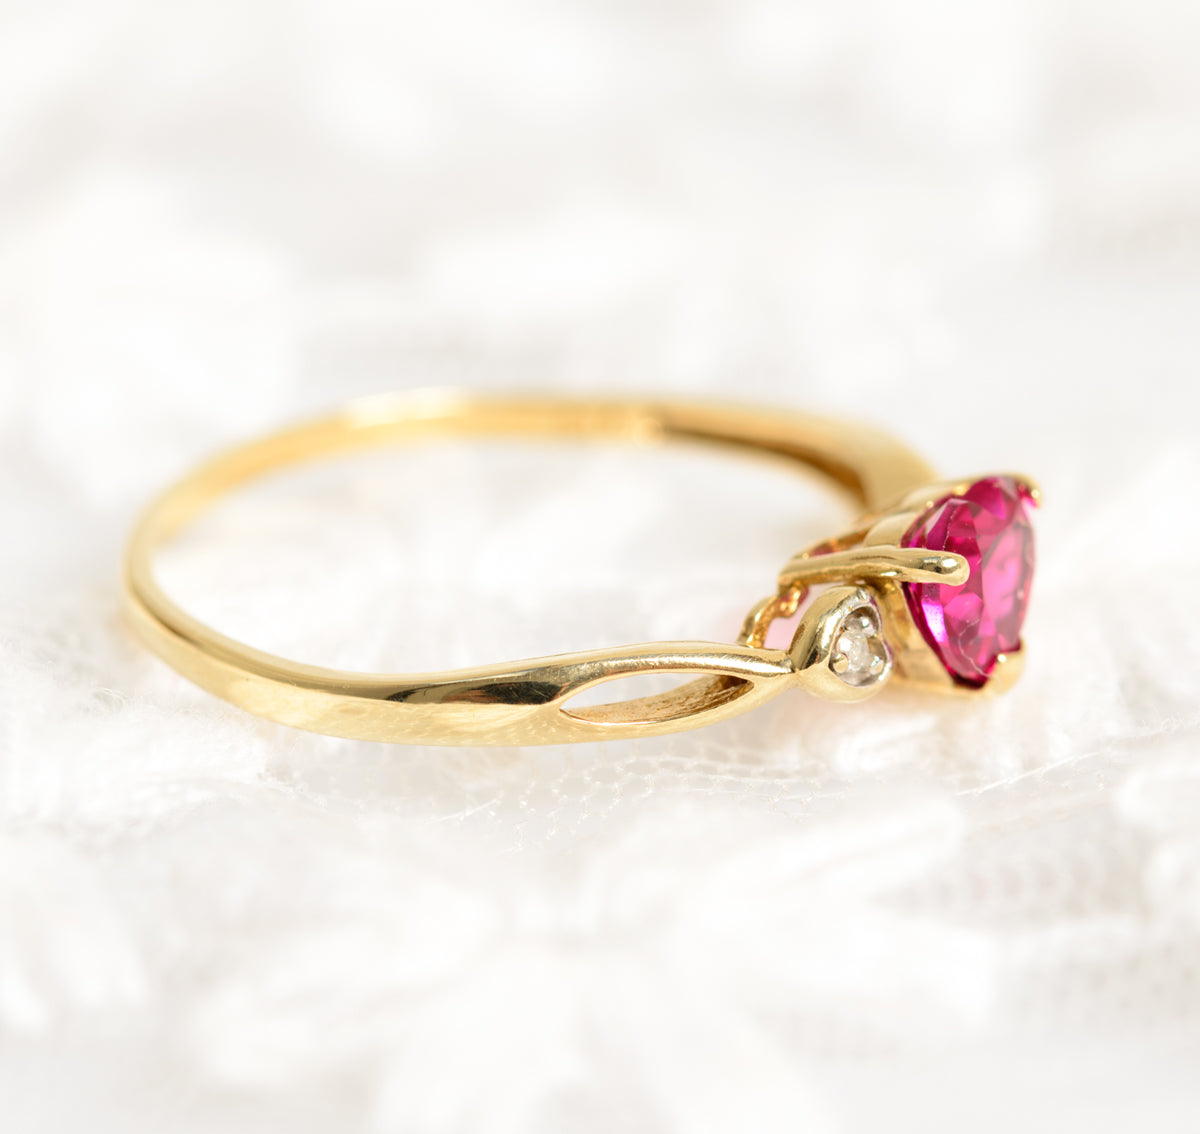 9ct 9K Gold, Pink Topaz & Diamond Ladies Dainty Promise Ring UK Size O1/2 (A1319)